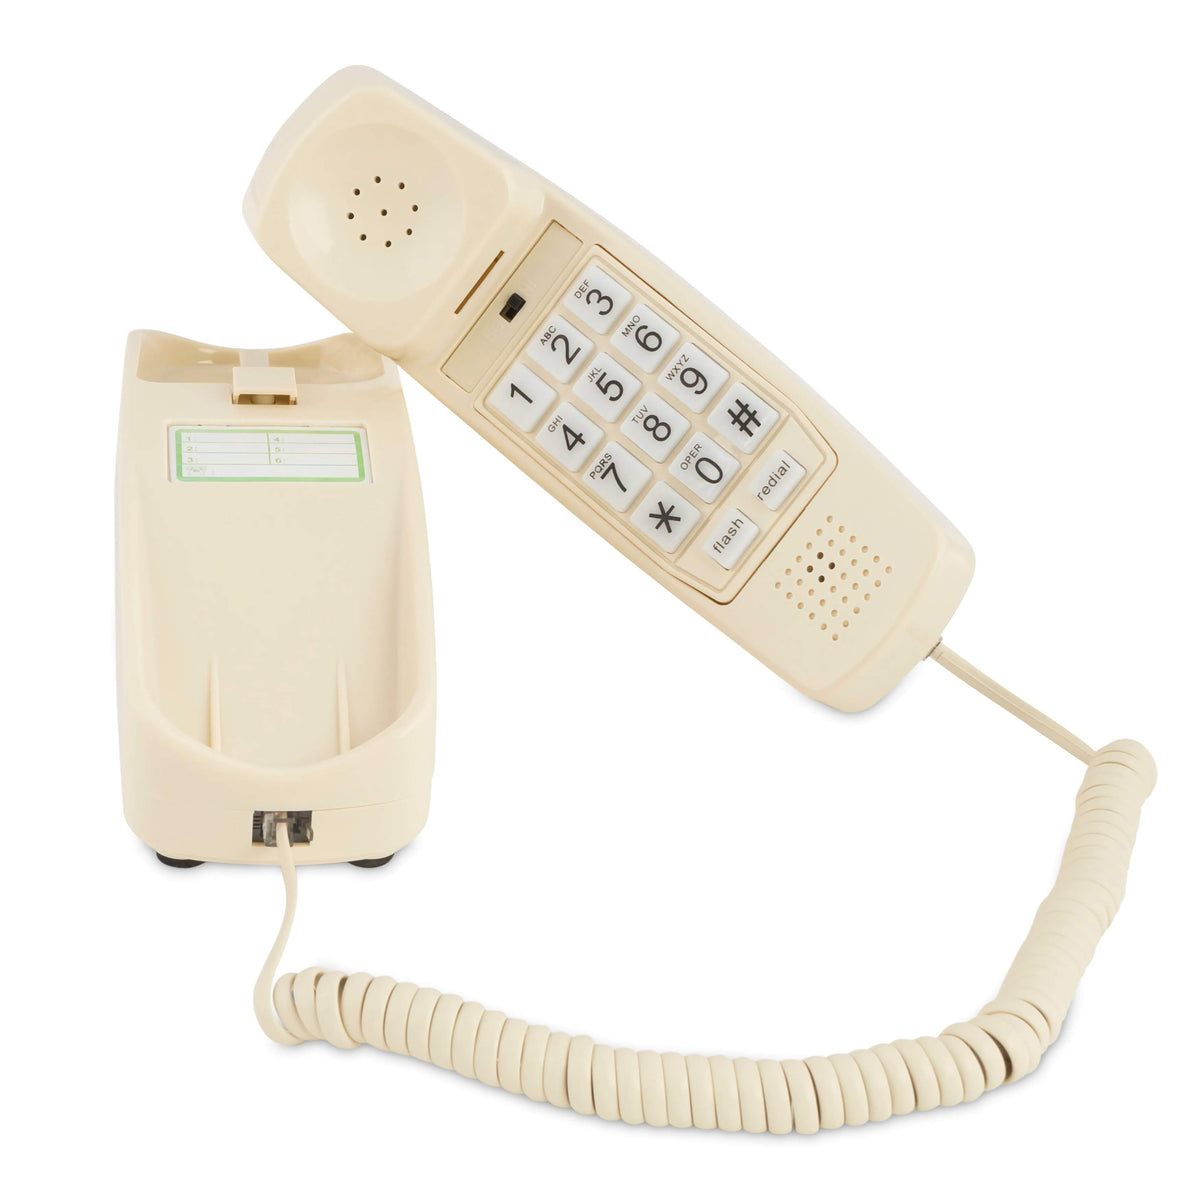 iSoHo Phones - Rediscover Timeless Connectivity: Big Button Corded Phone - Elegance Meets Simplicity for Your Home Office and Senior Loved Ones, Bone Ivory